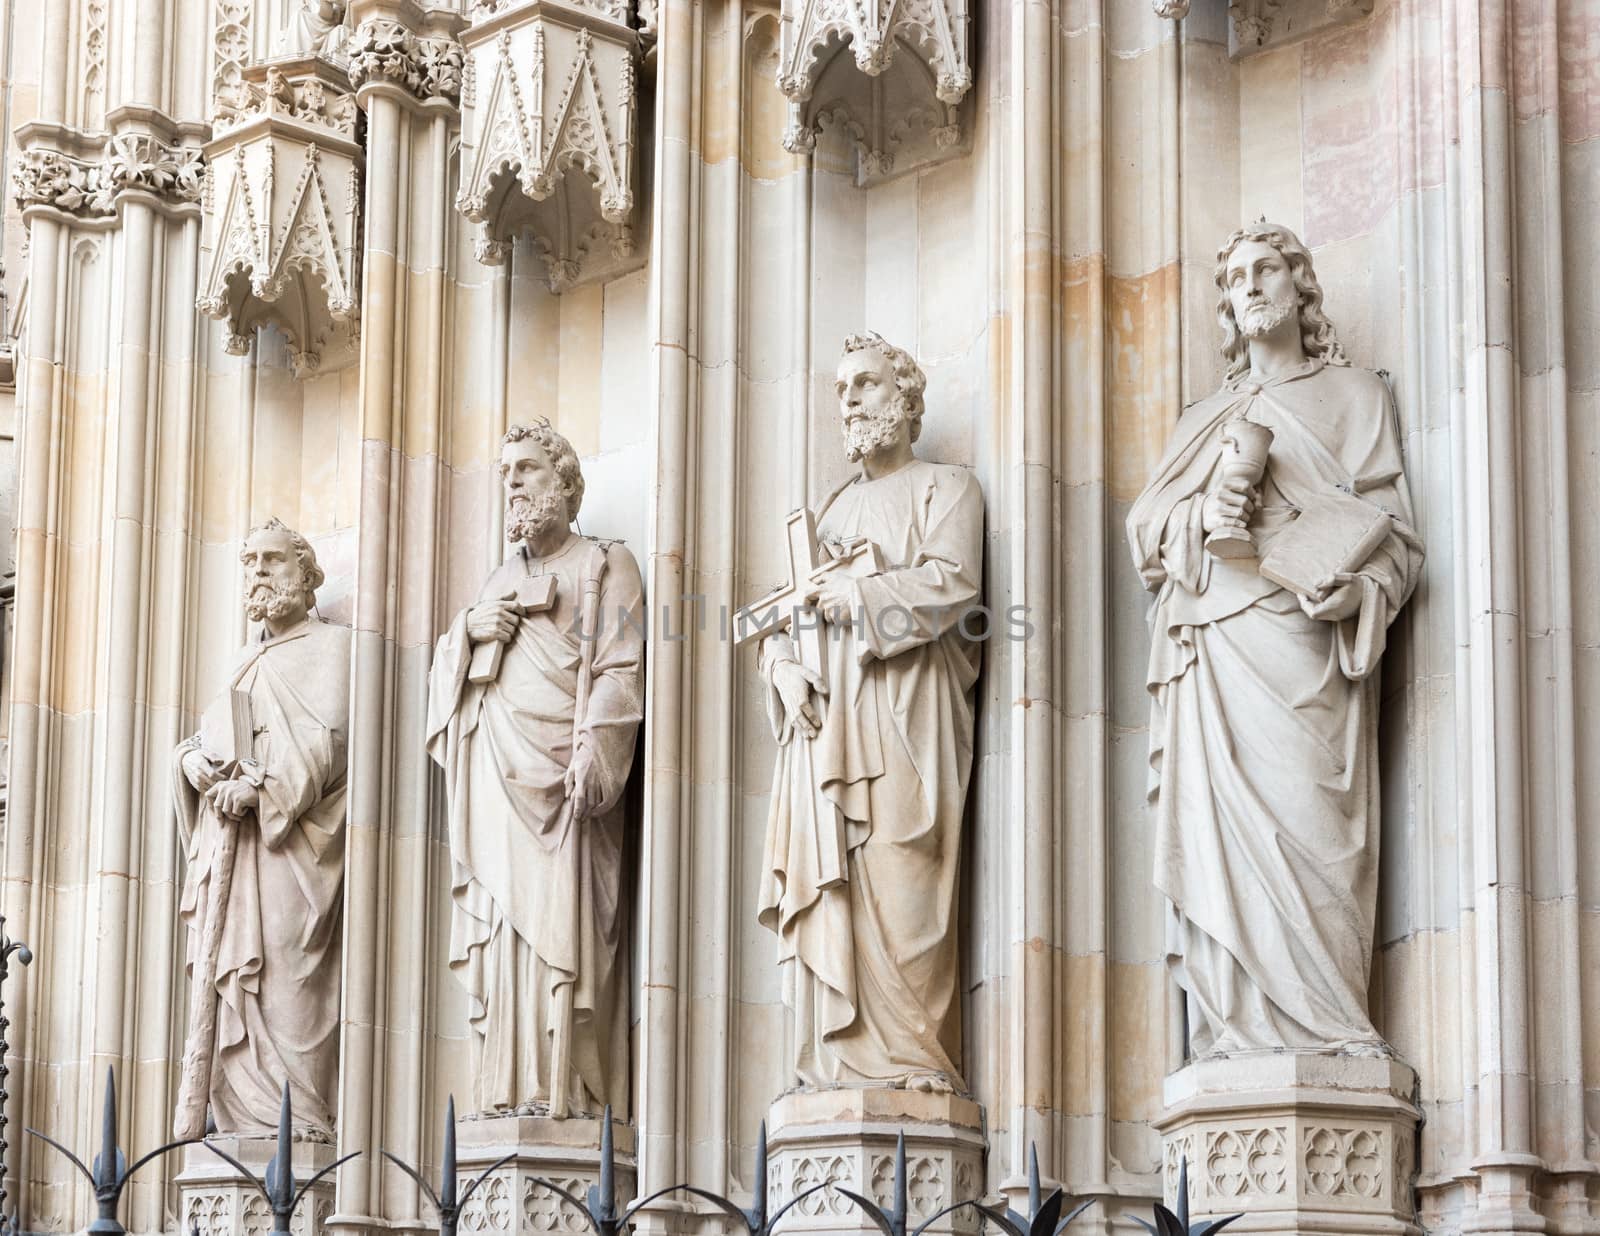 Statues at the entrance into cathedral in Barcelona, Spain. by Marcus